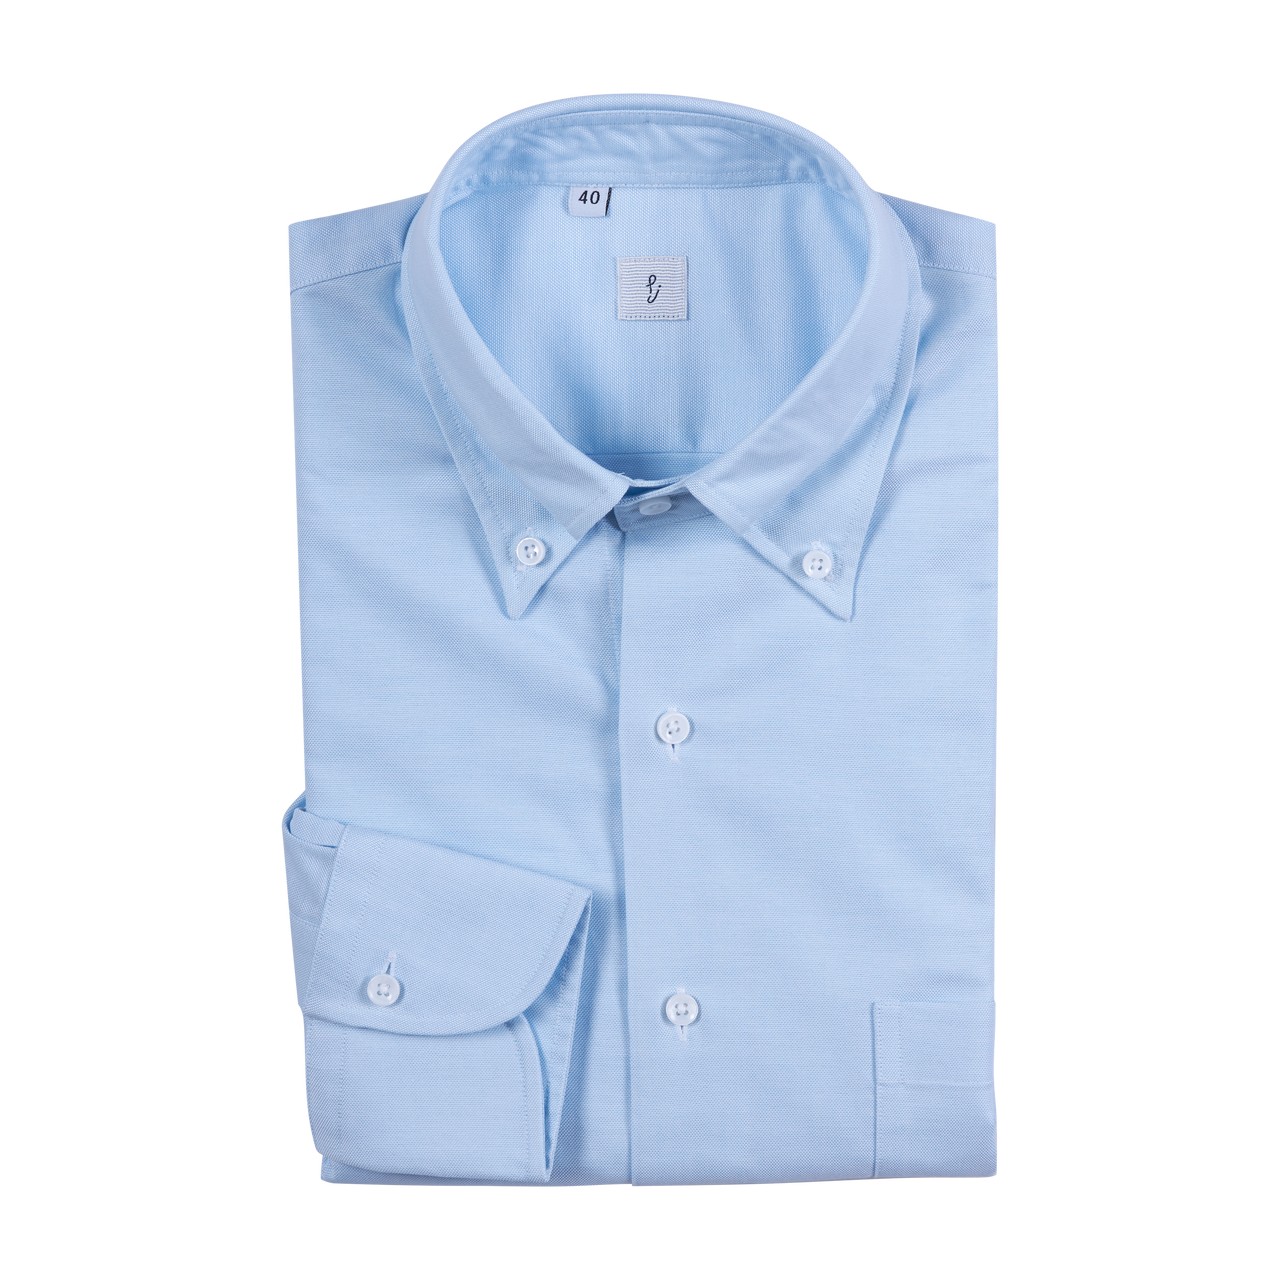 P. Johnson Shirt in Blue American Oxford with Button Down Collar